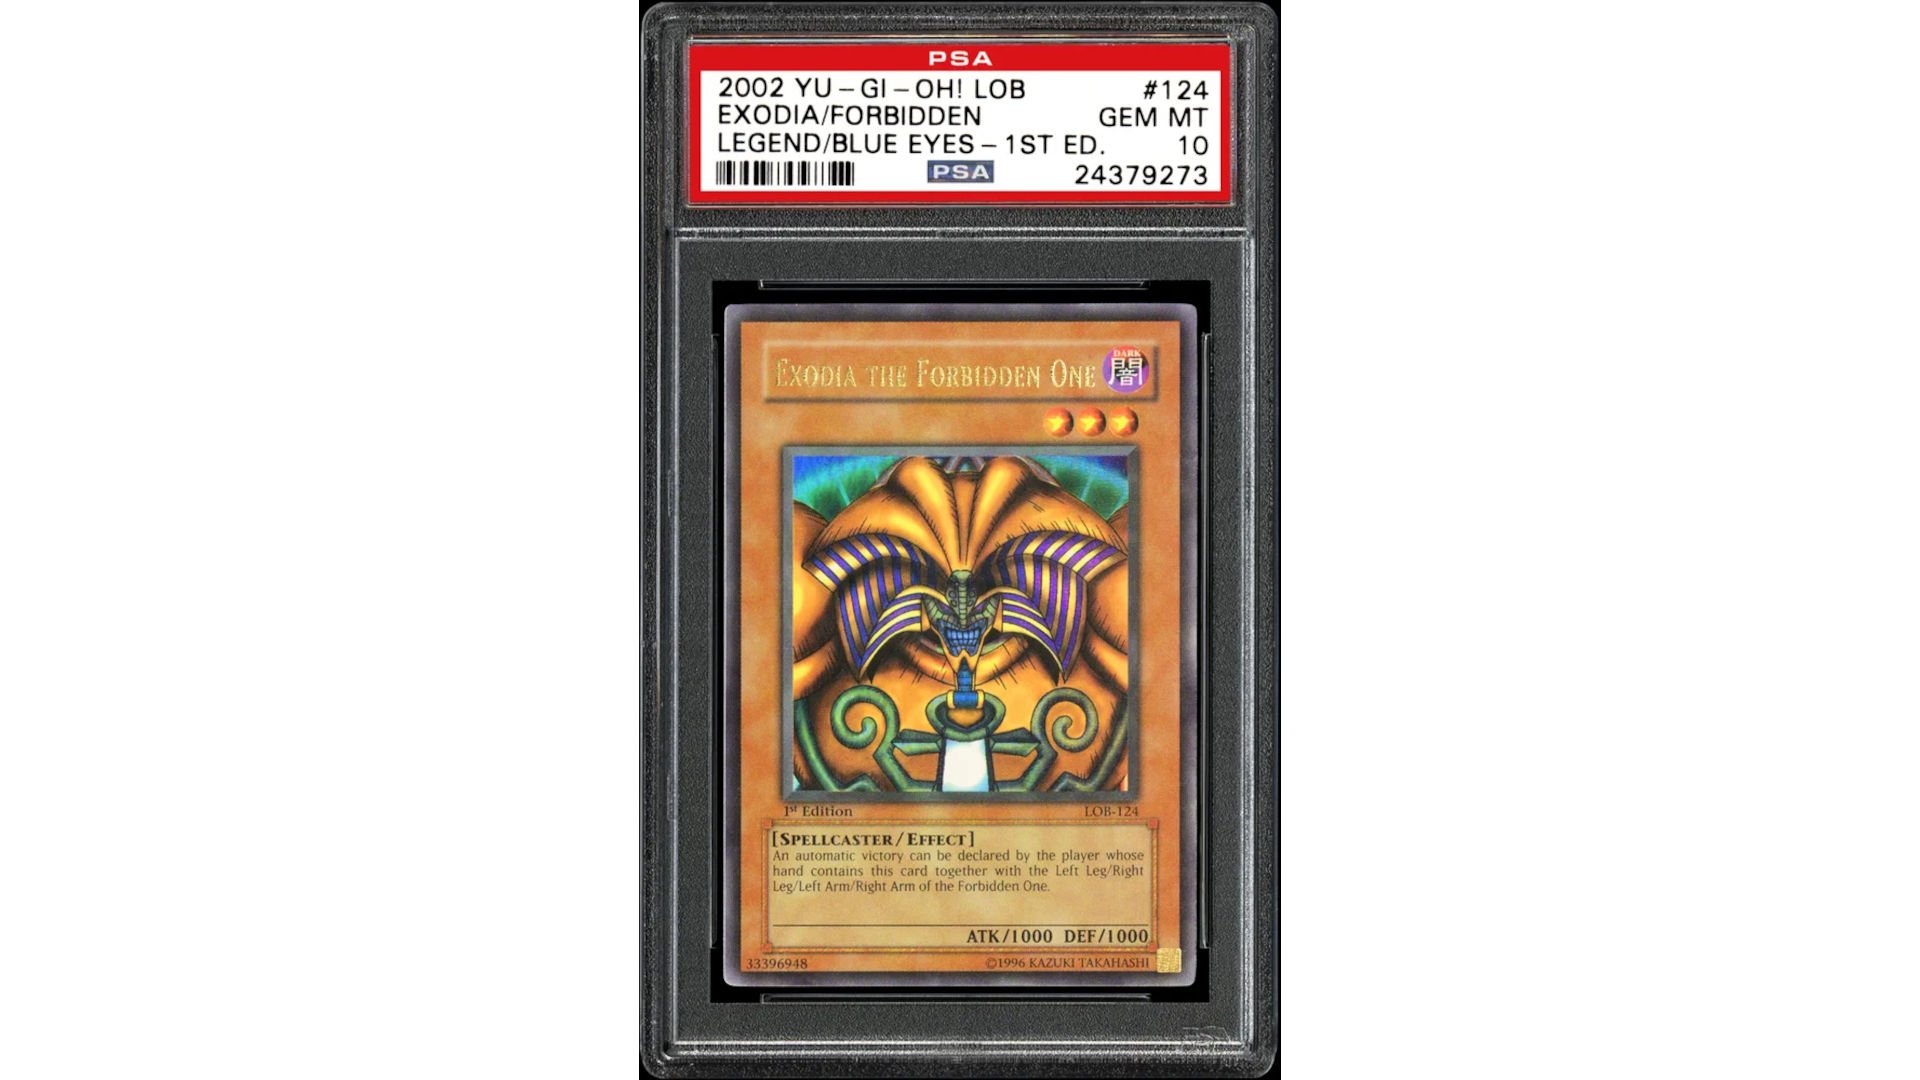 Most expensive Yugioh cards - photo of a copy of Exodia, a rare YuGiOh card